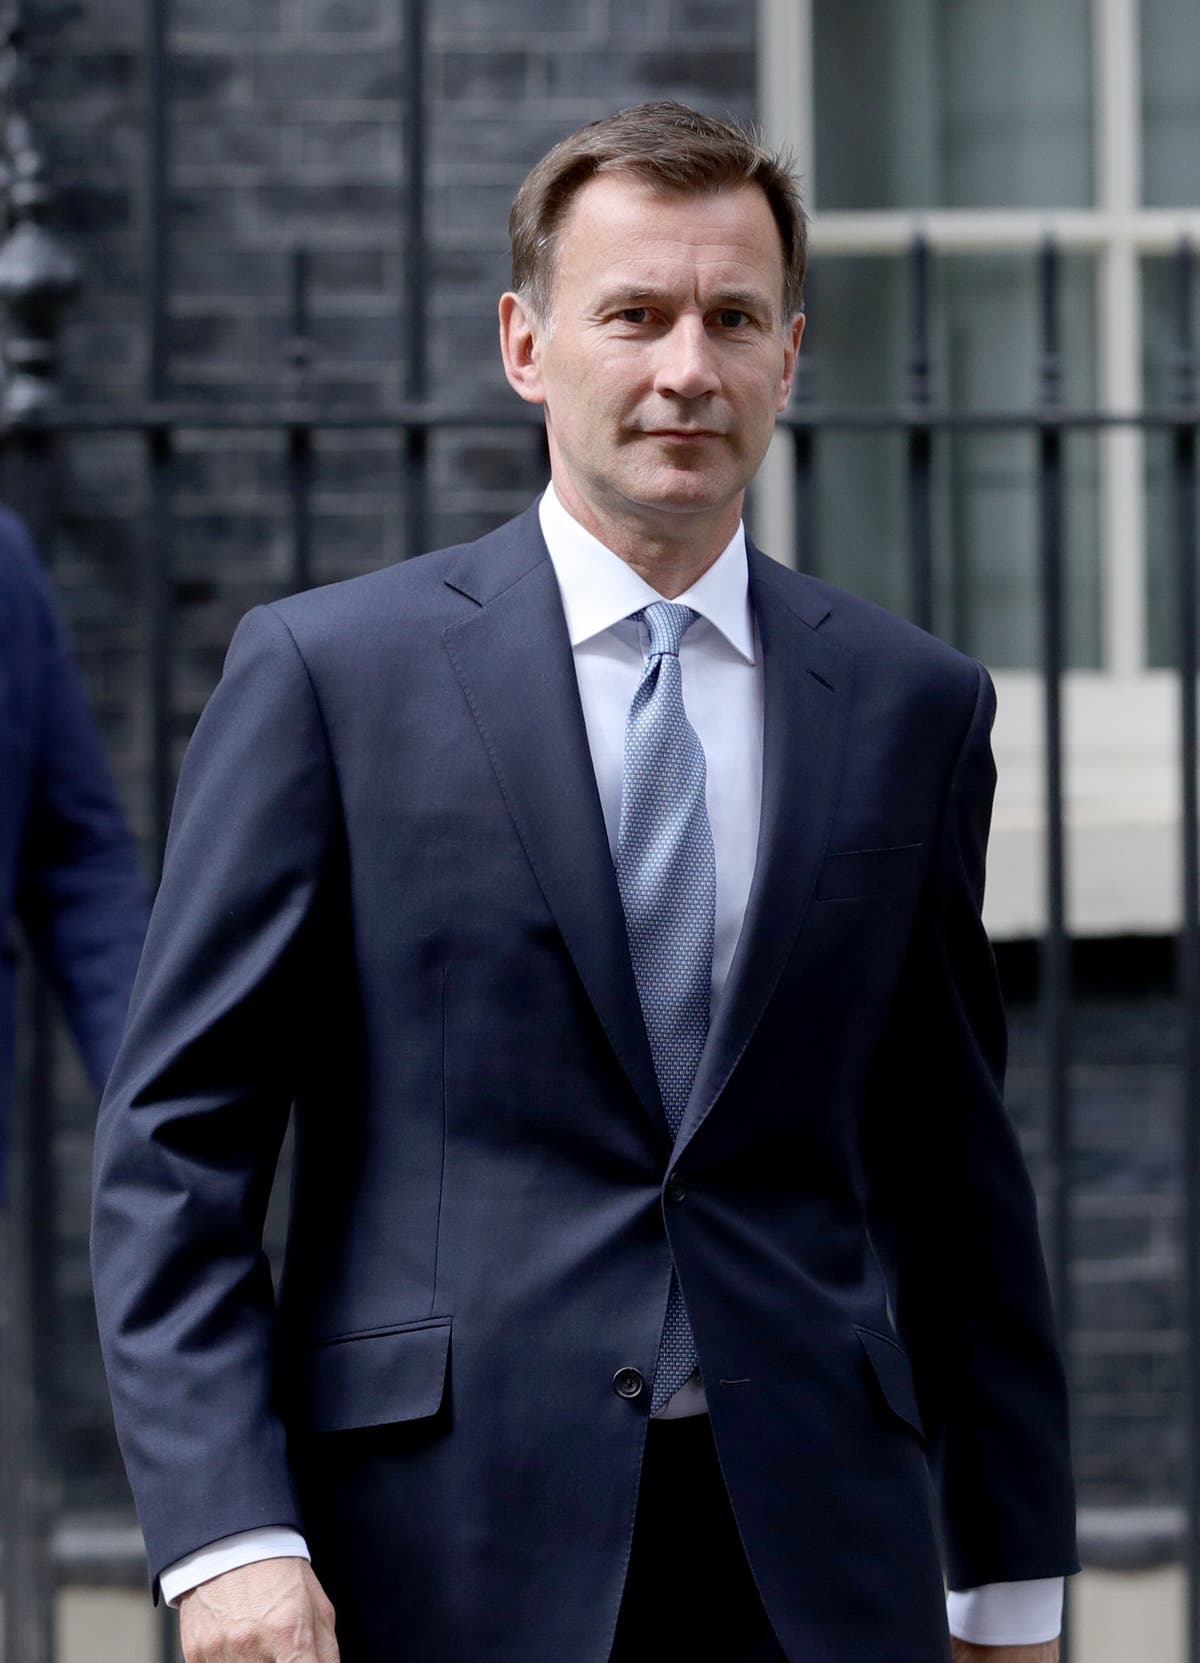 Institutions and the state sometimes close ranks around a lie – Jeremy Hunt